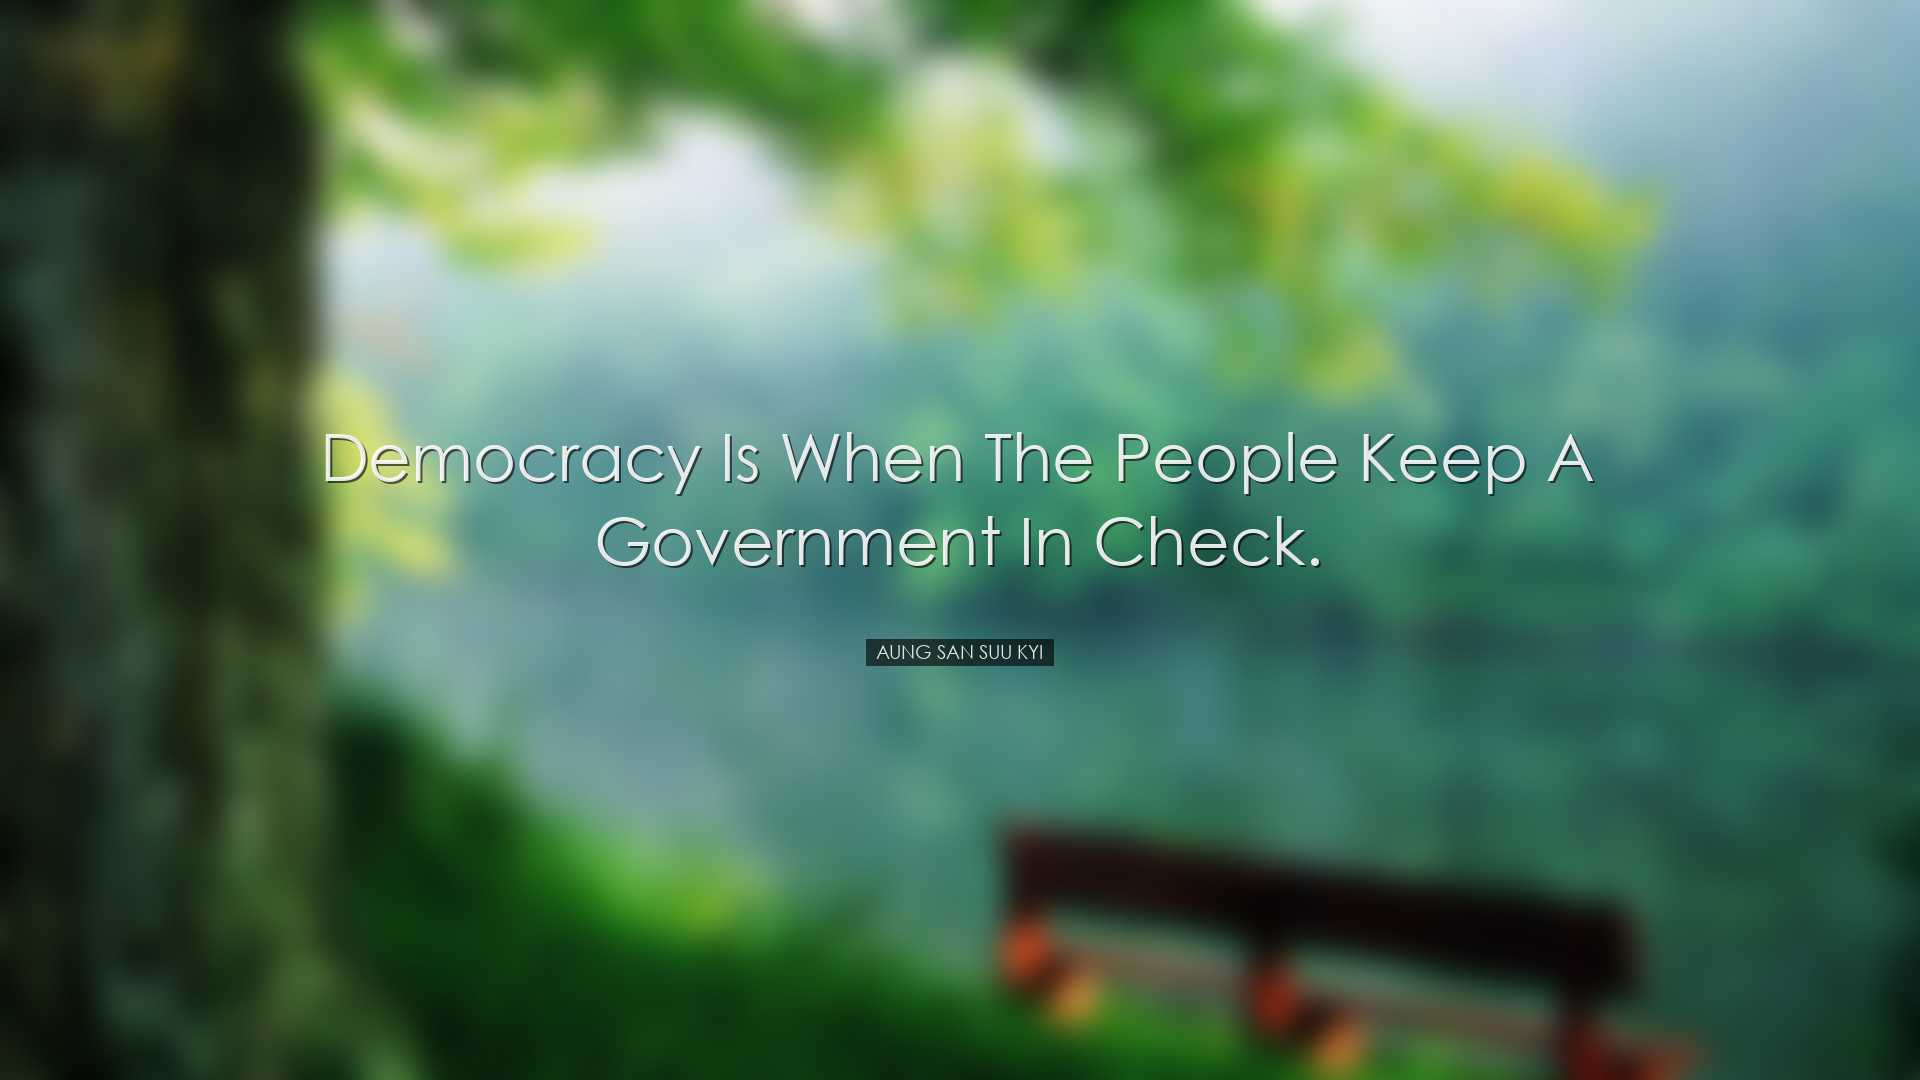 Democracy is when the people keep a government in check. - Aung Sa